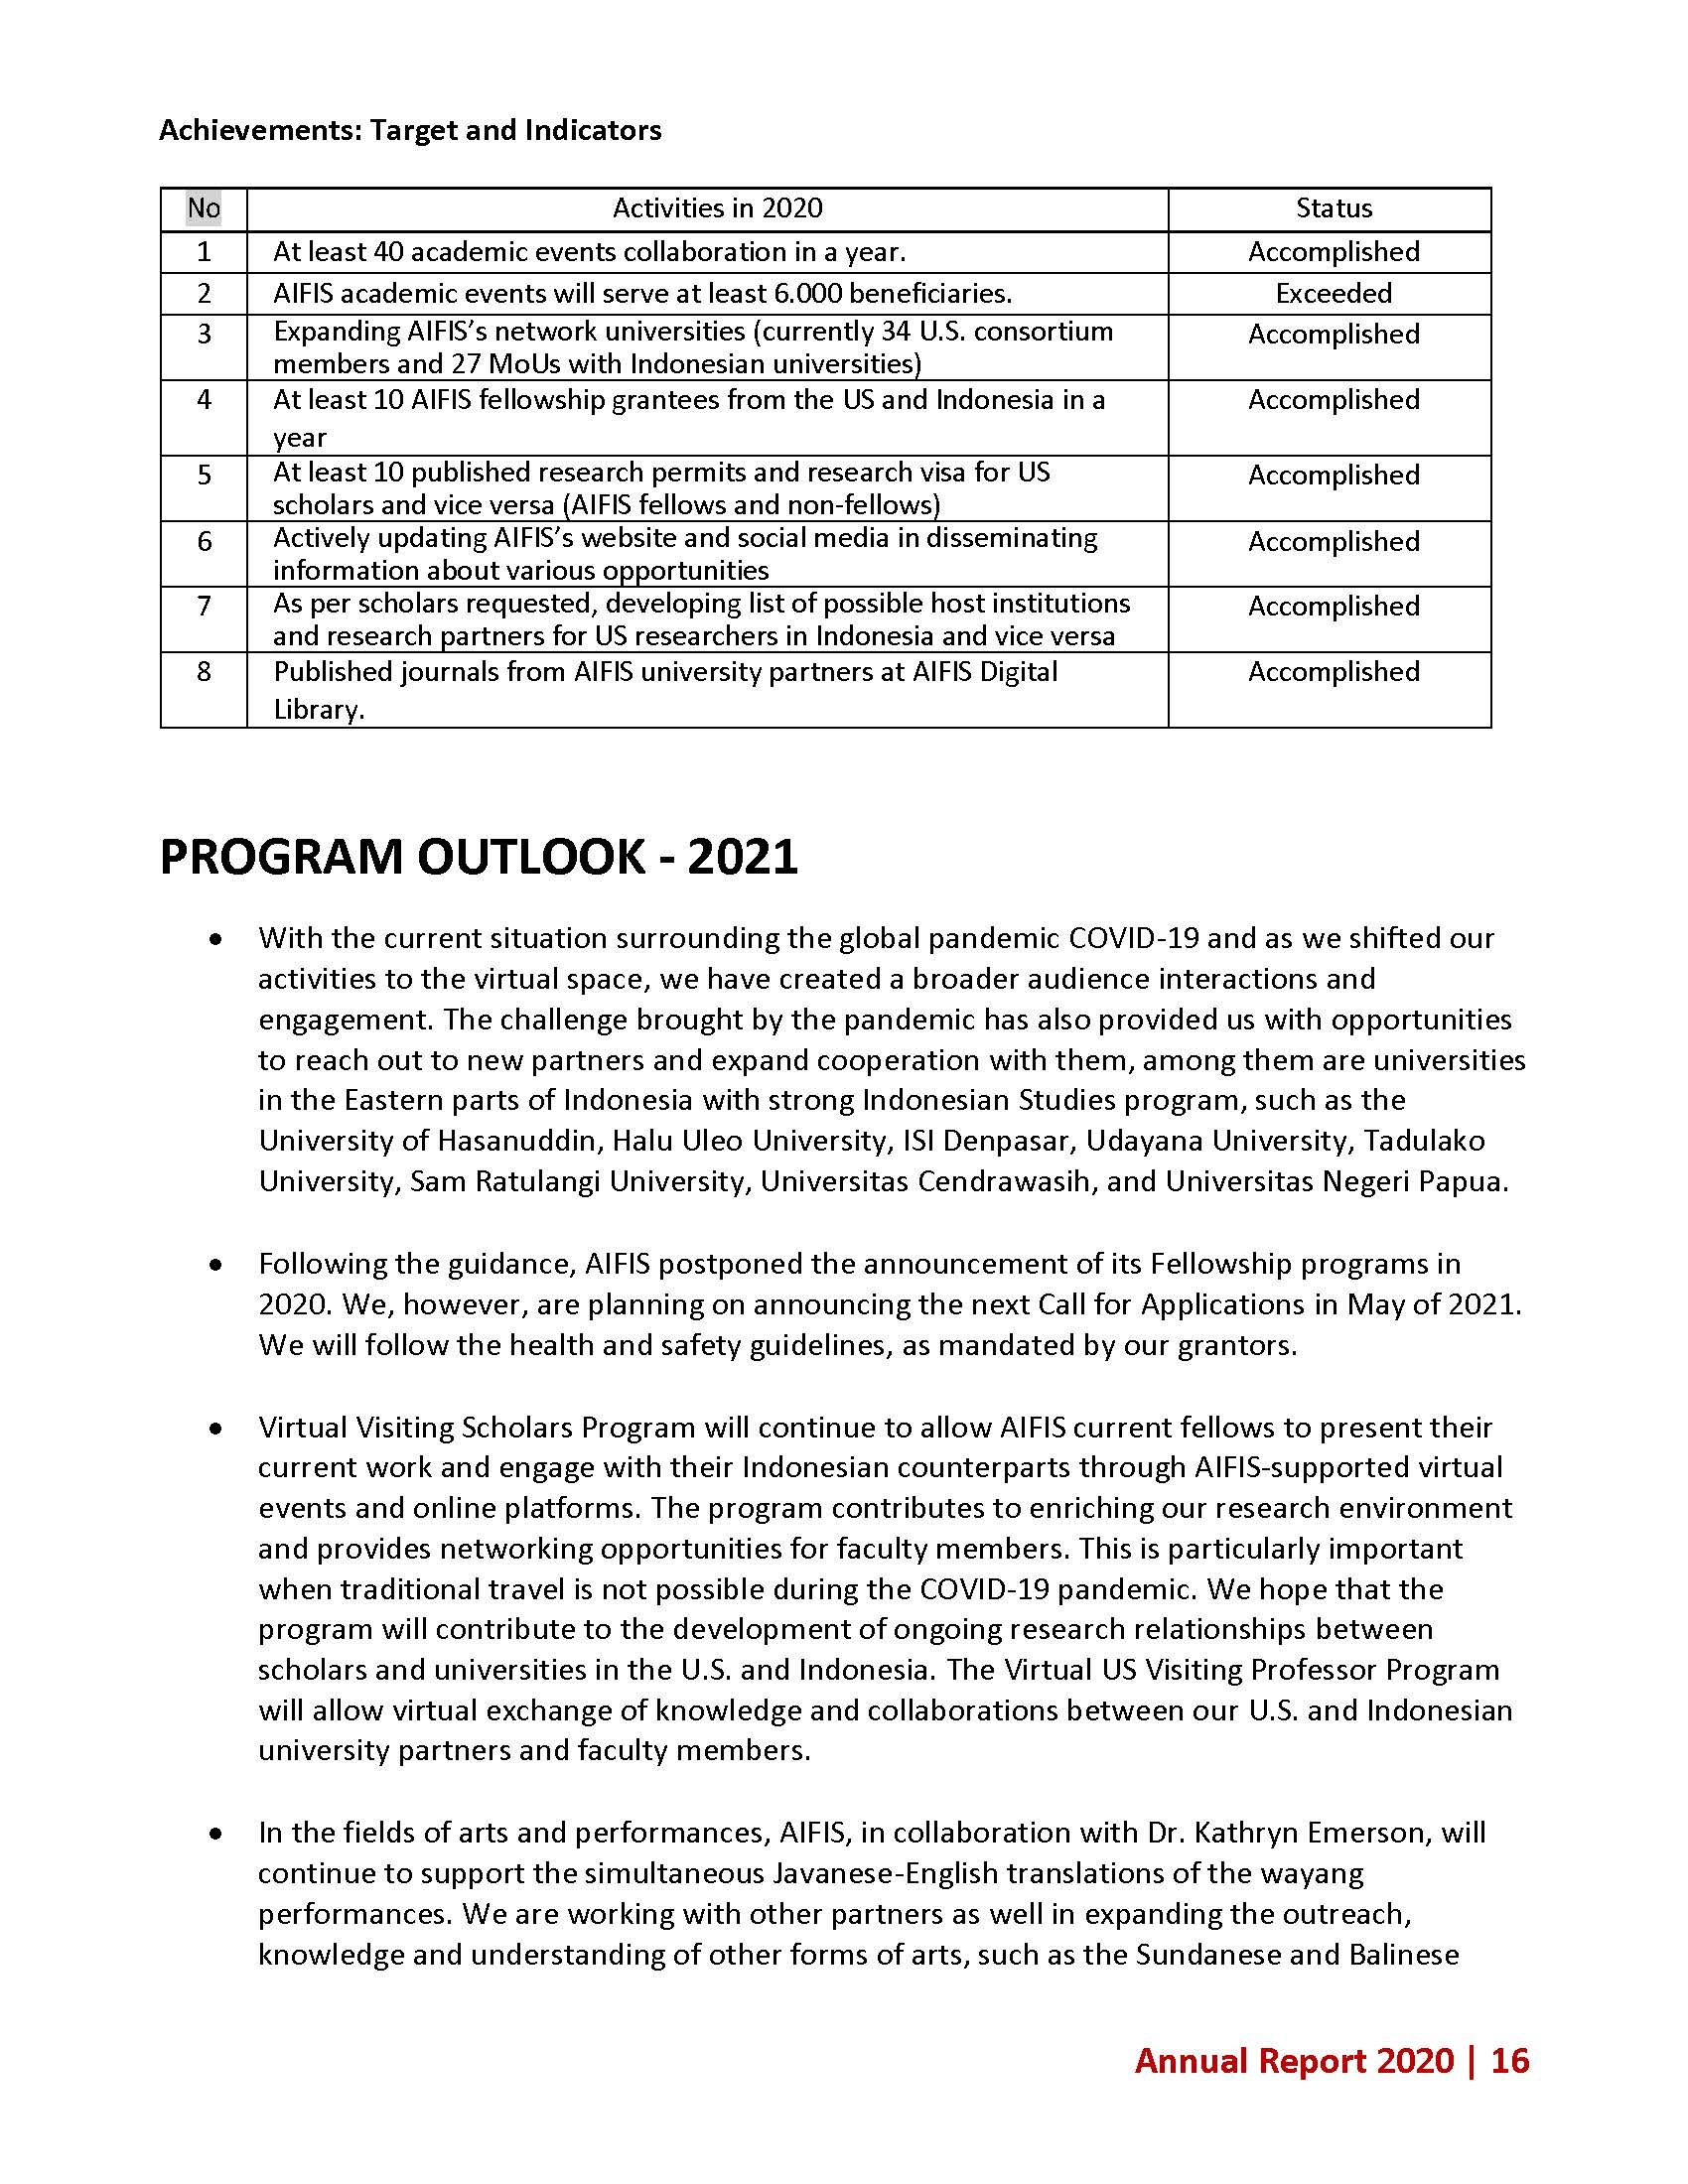 AIFIS_Annual+Report+2020_FINAL_Page_19.jpg